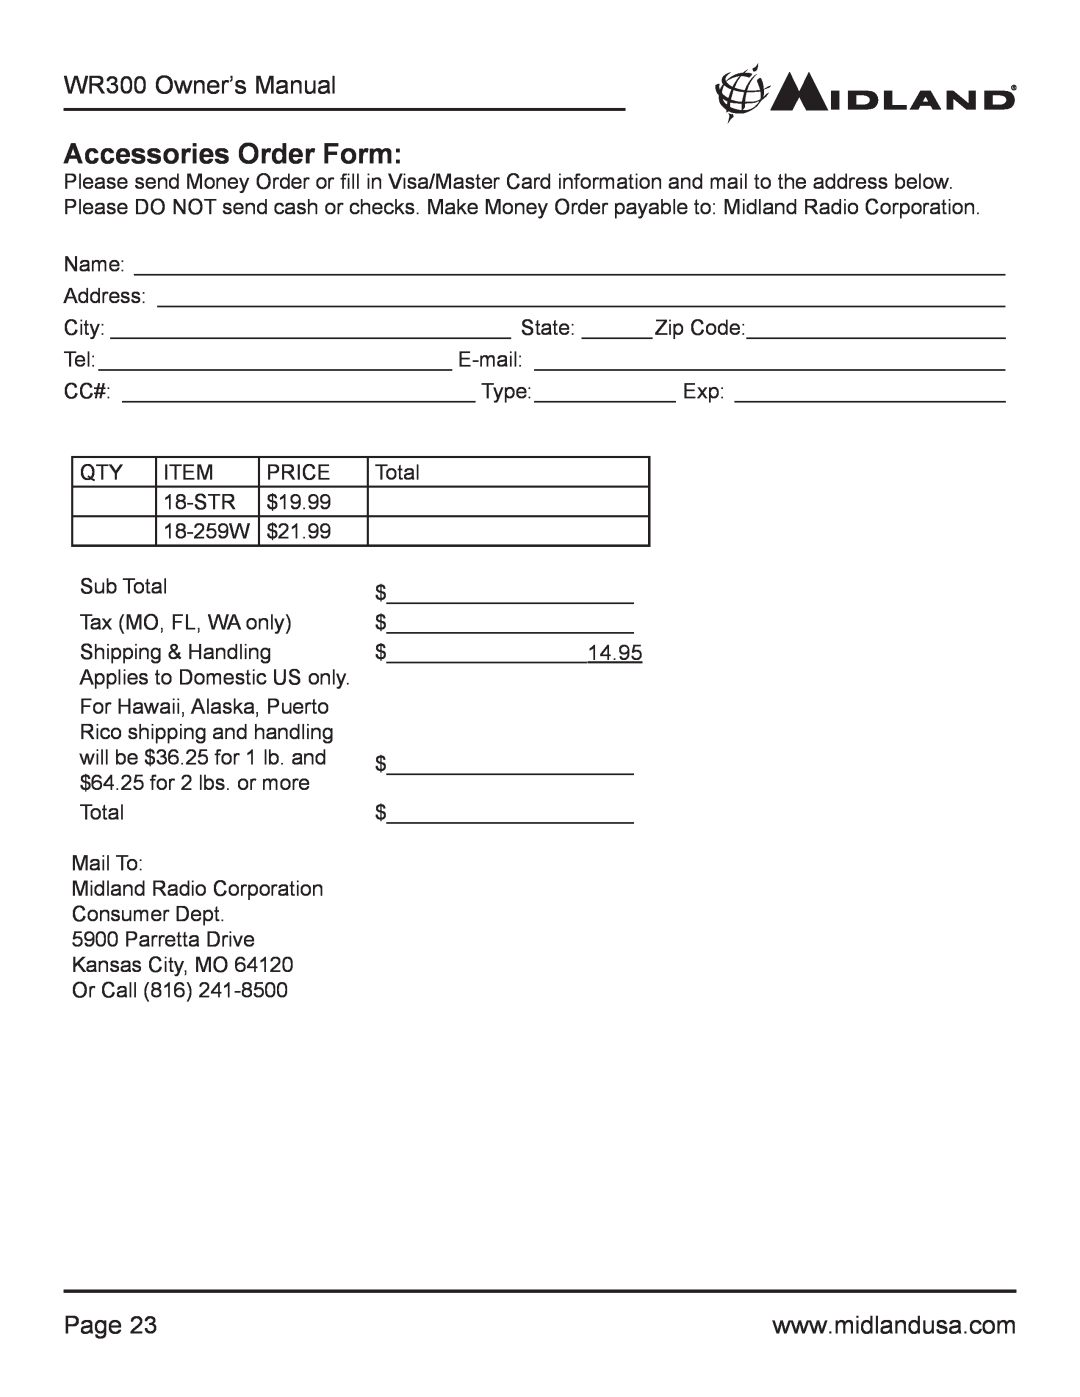 Midland Radio WR300 owner manual Accessories Order Form, Page 